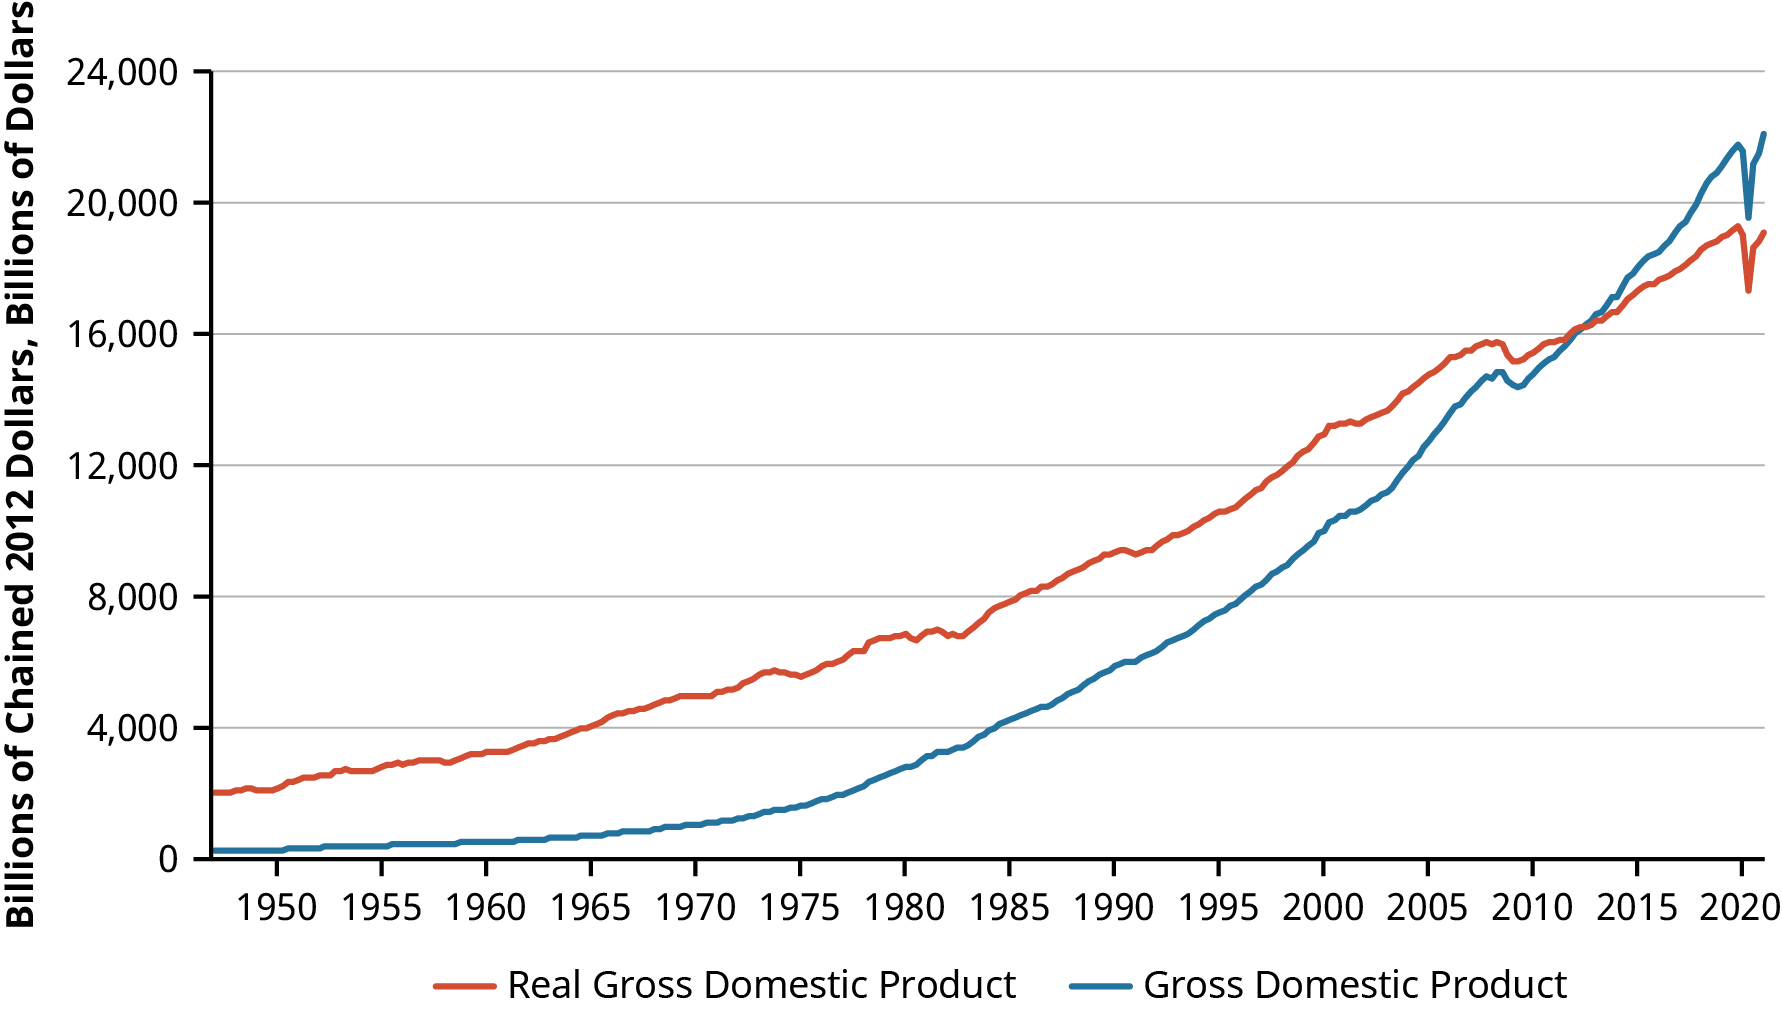 Graph of Gross Domestic Product (GDP) in the US from 1950 to 2020. This graph compares real GDP to GDP. It shows that the real GDP was higher than GDP from 1950 to 2010. Since 2010 GDP has been higher than Real GDP.